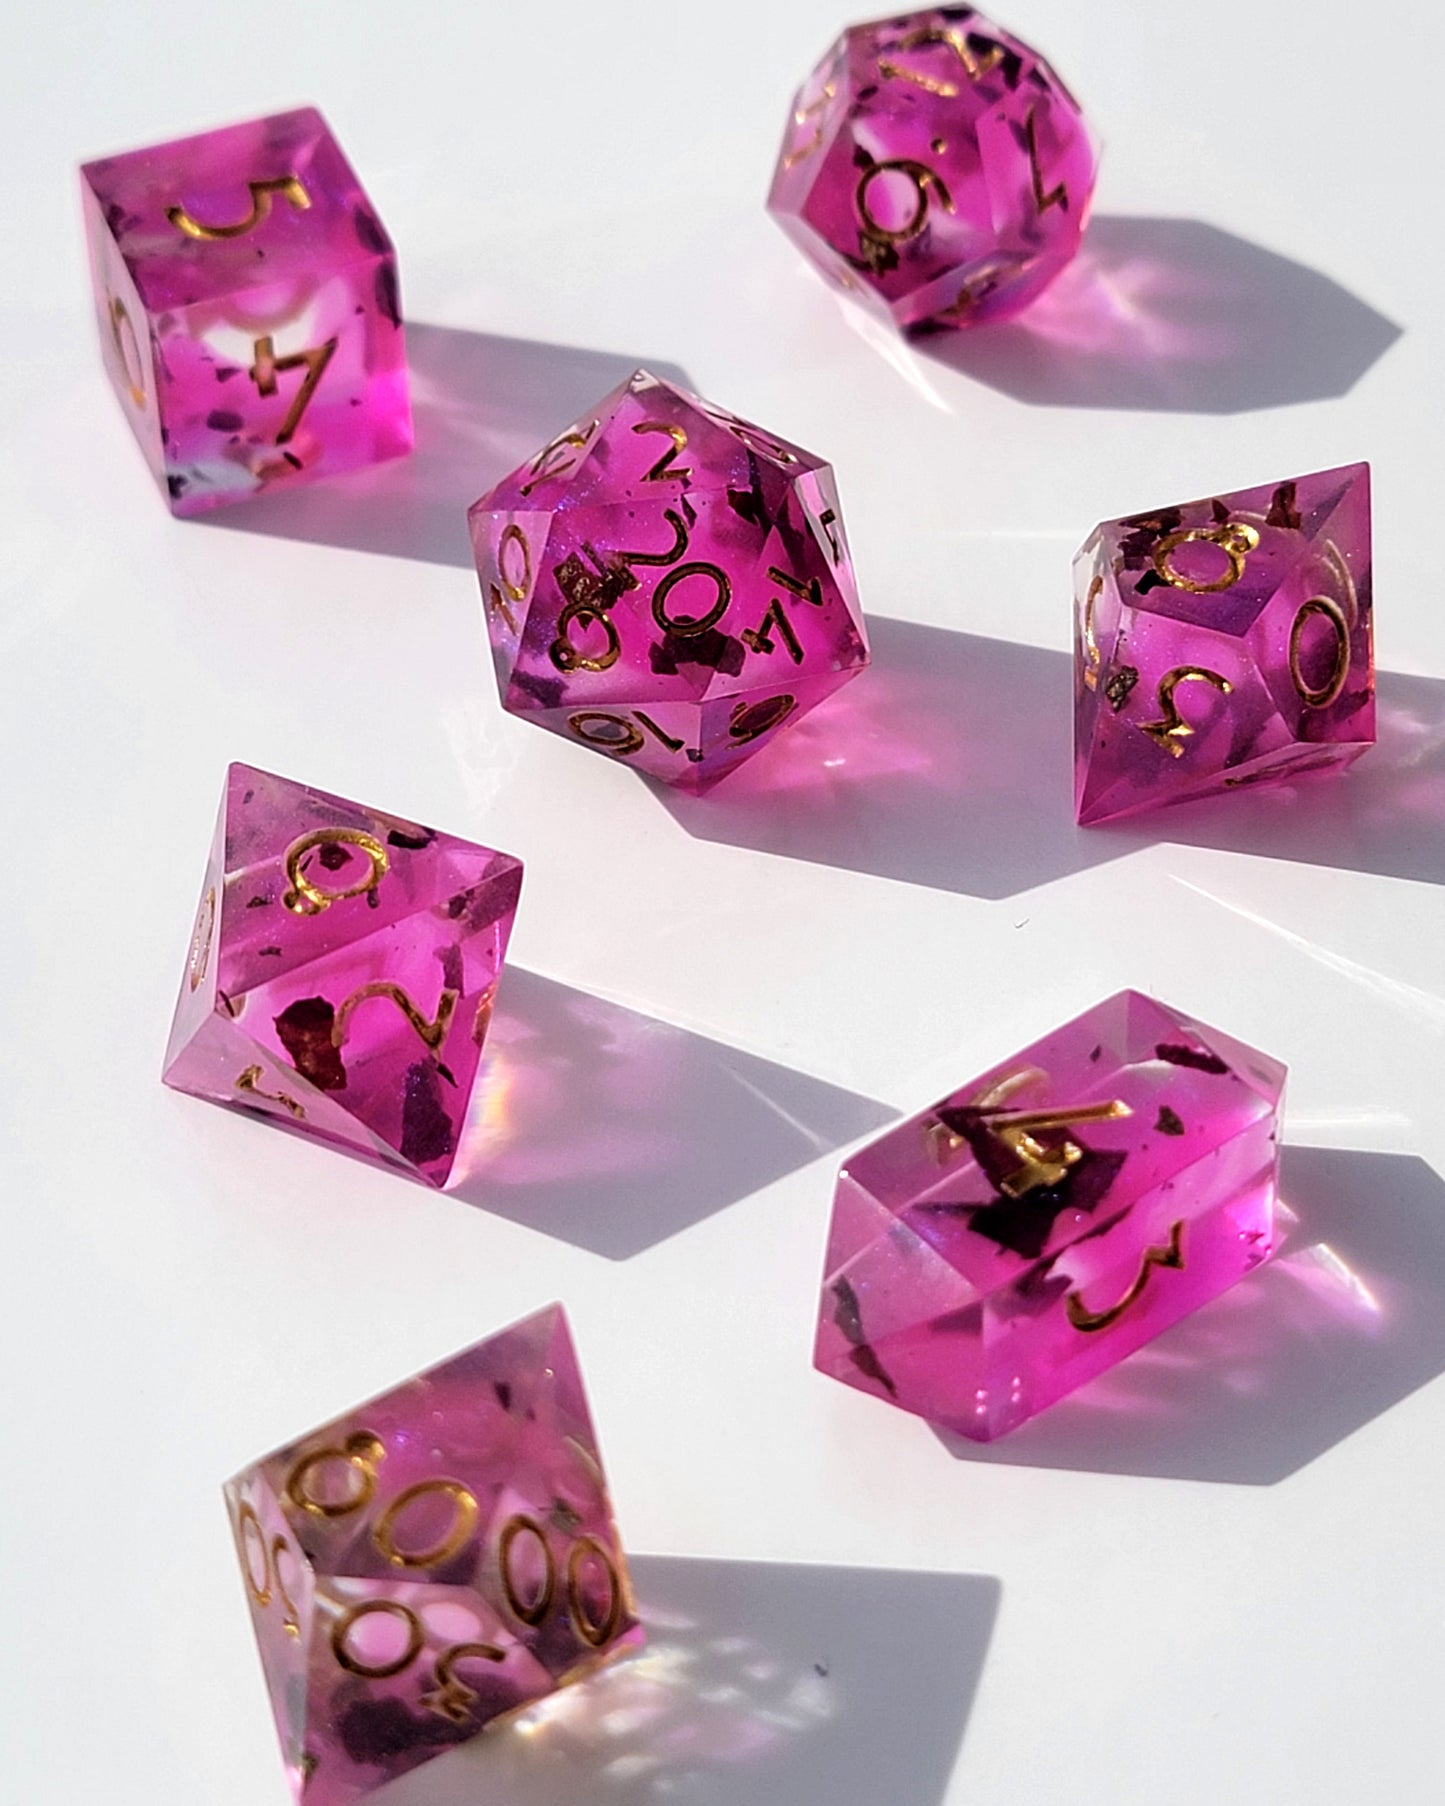 Pursuit of Romance - 7 Piece handmade D&D Dice| Hand Crafted Dungeons and Dragons Dice